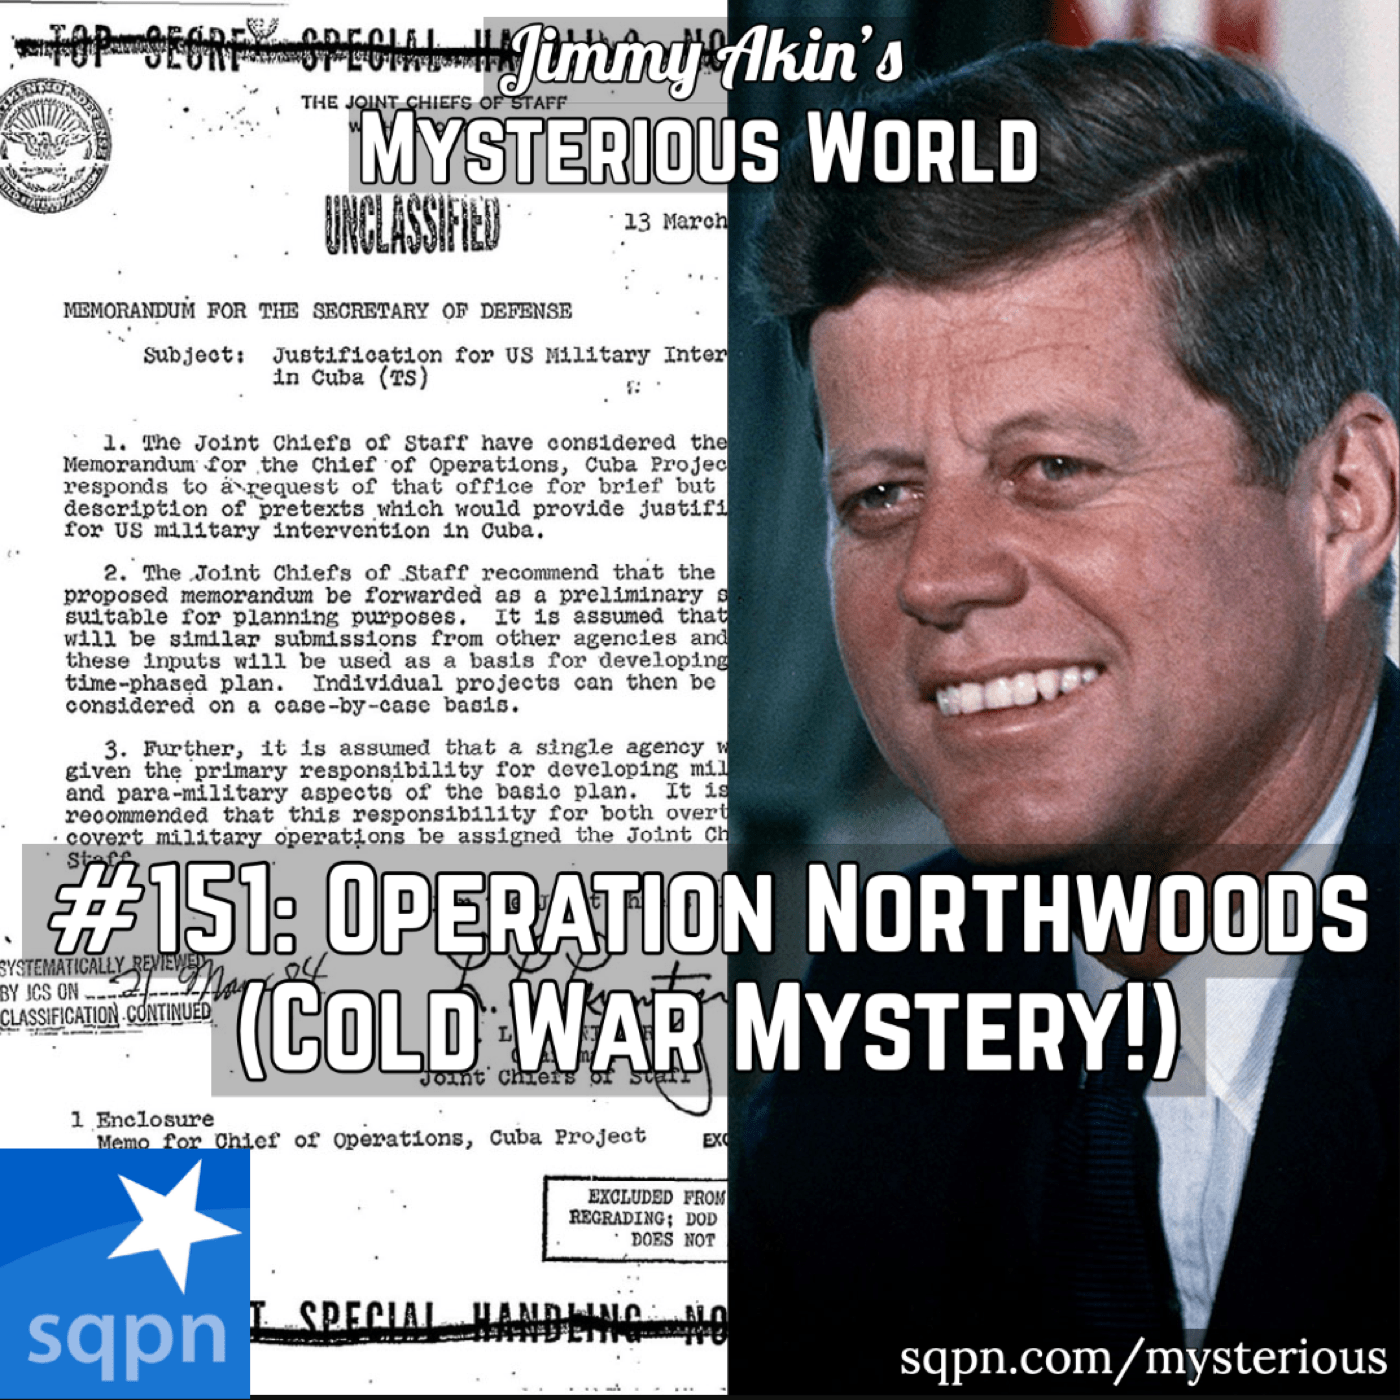 Operation Northwoods (Cold War Mystery!)